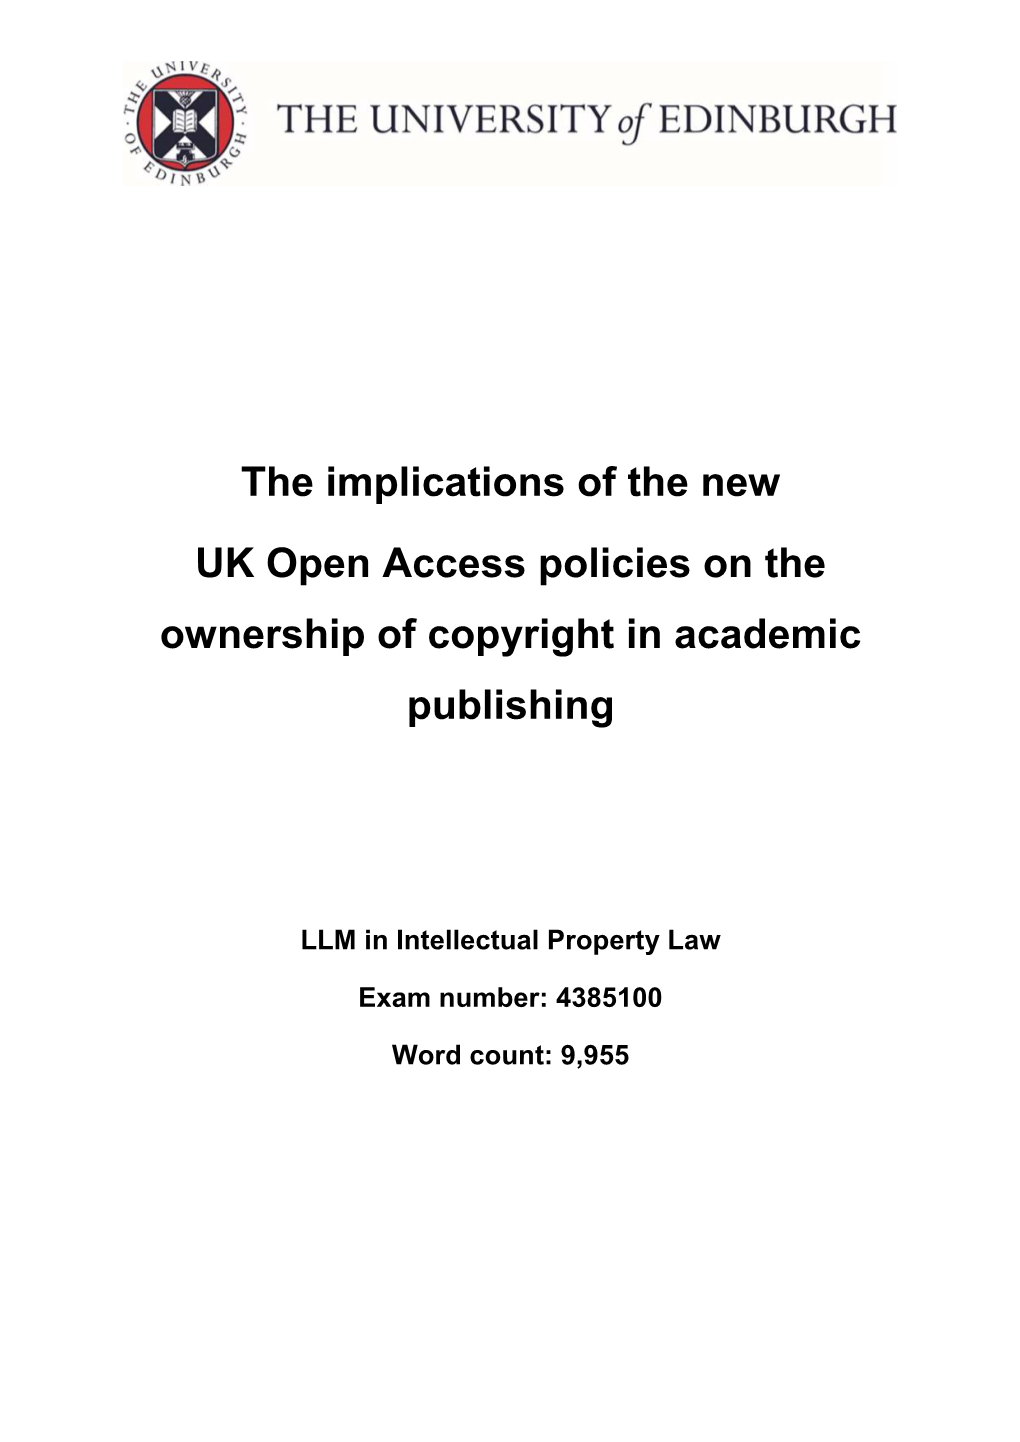 The Implications of the New UK Open Access Policies on the Ownership of Copyright in Academic Publishing